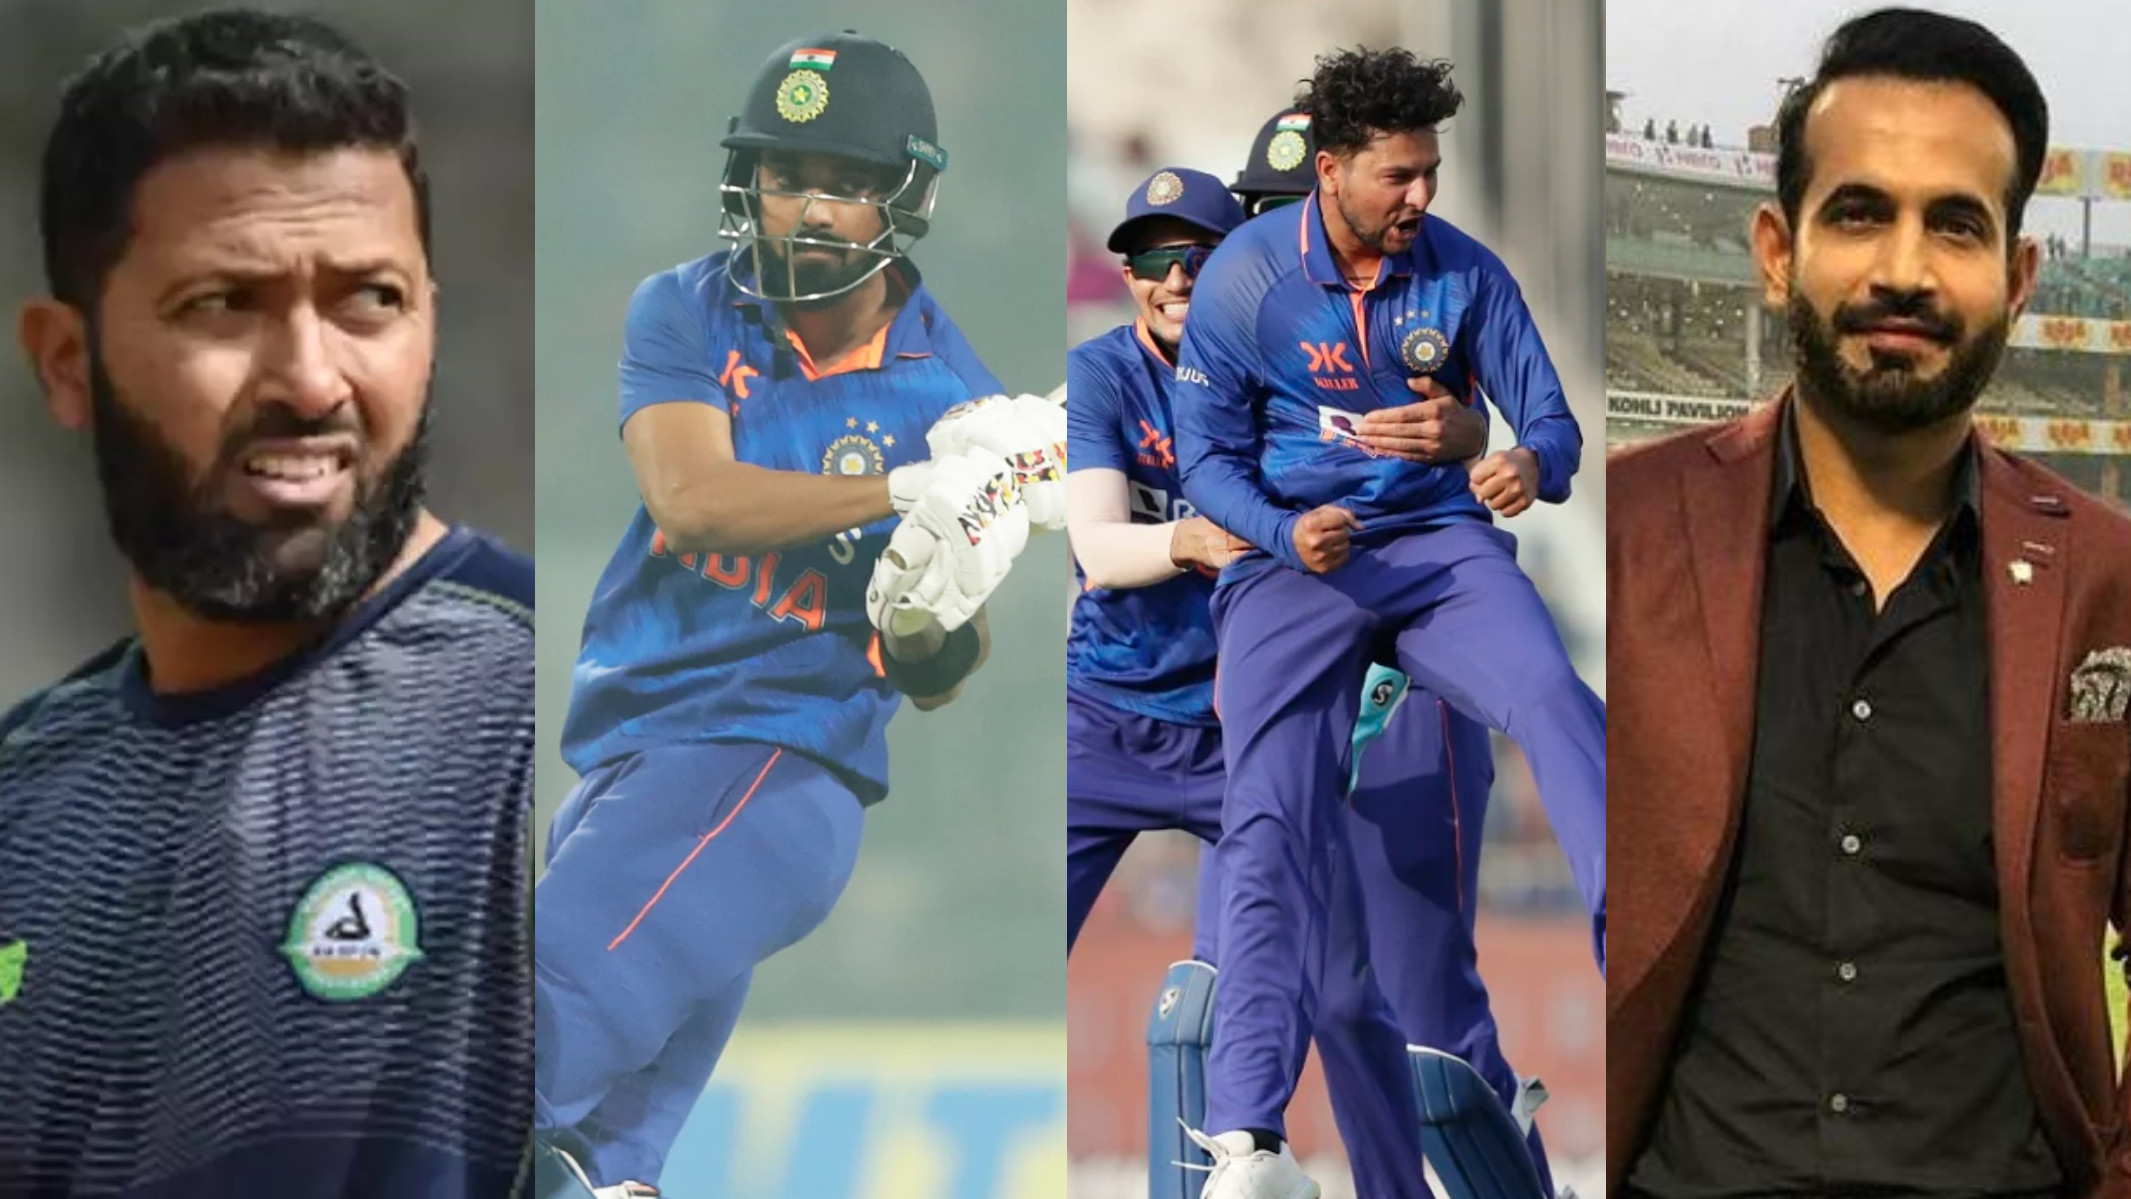 IND v SL 2023: Indian cricket fraternity reacts as KL Rahul and Kuldeep Yadav star in India’s 4-wicket win in 2nd ODI